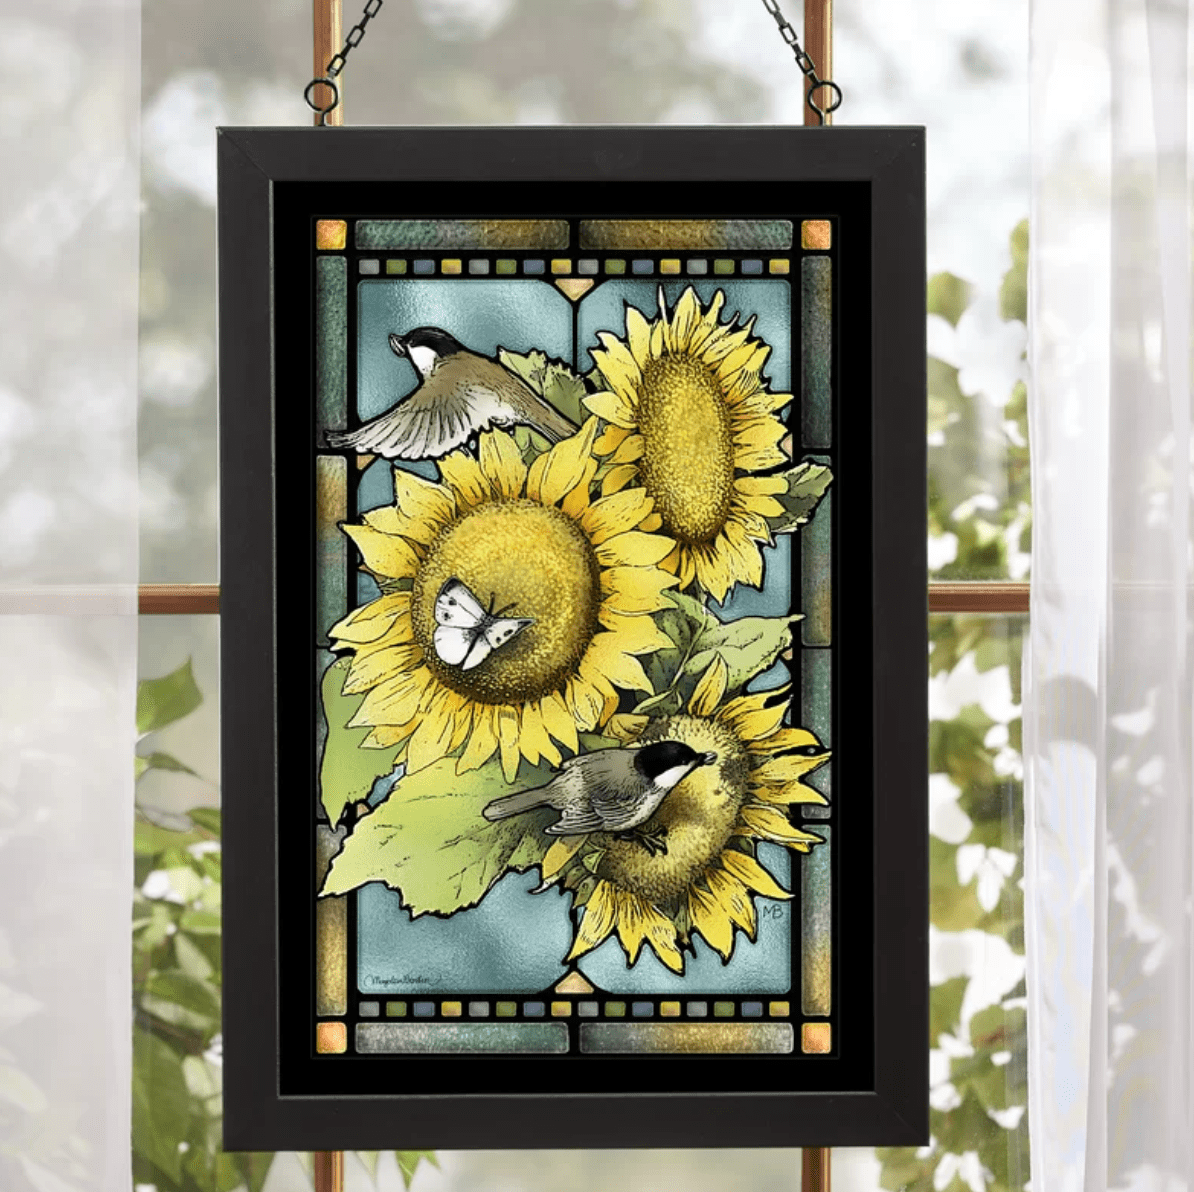 20 Sunflower Gifts That Will Brighten Anyone's Day